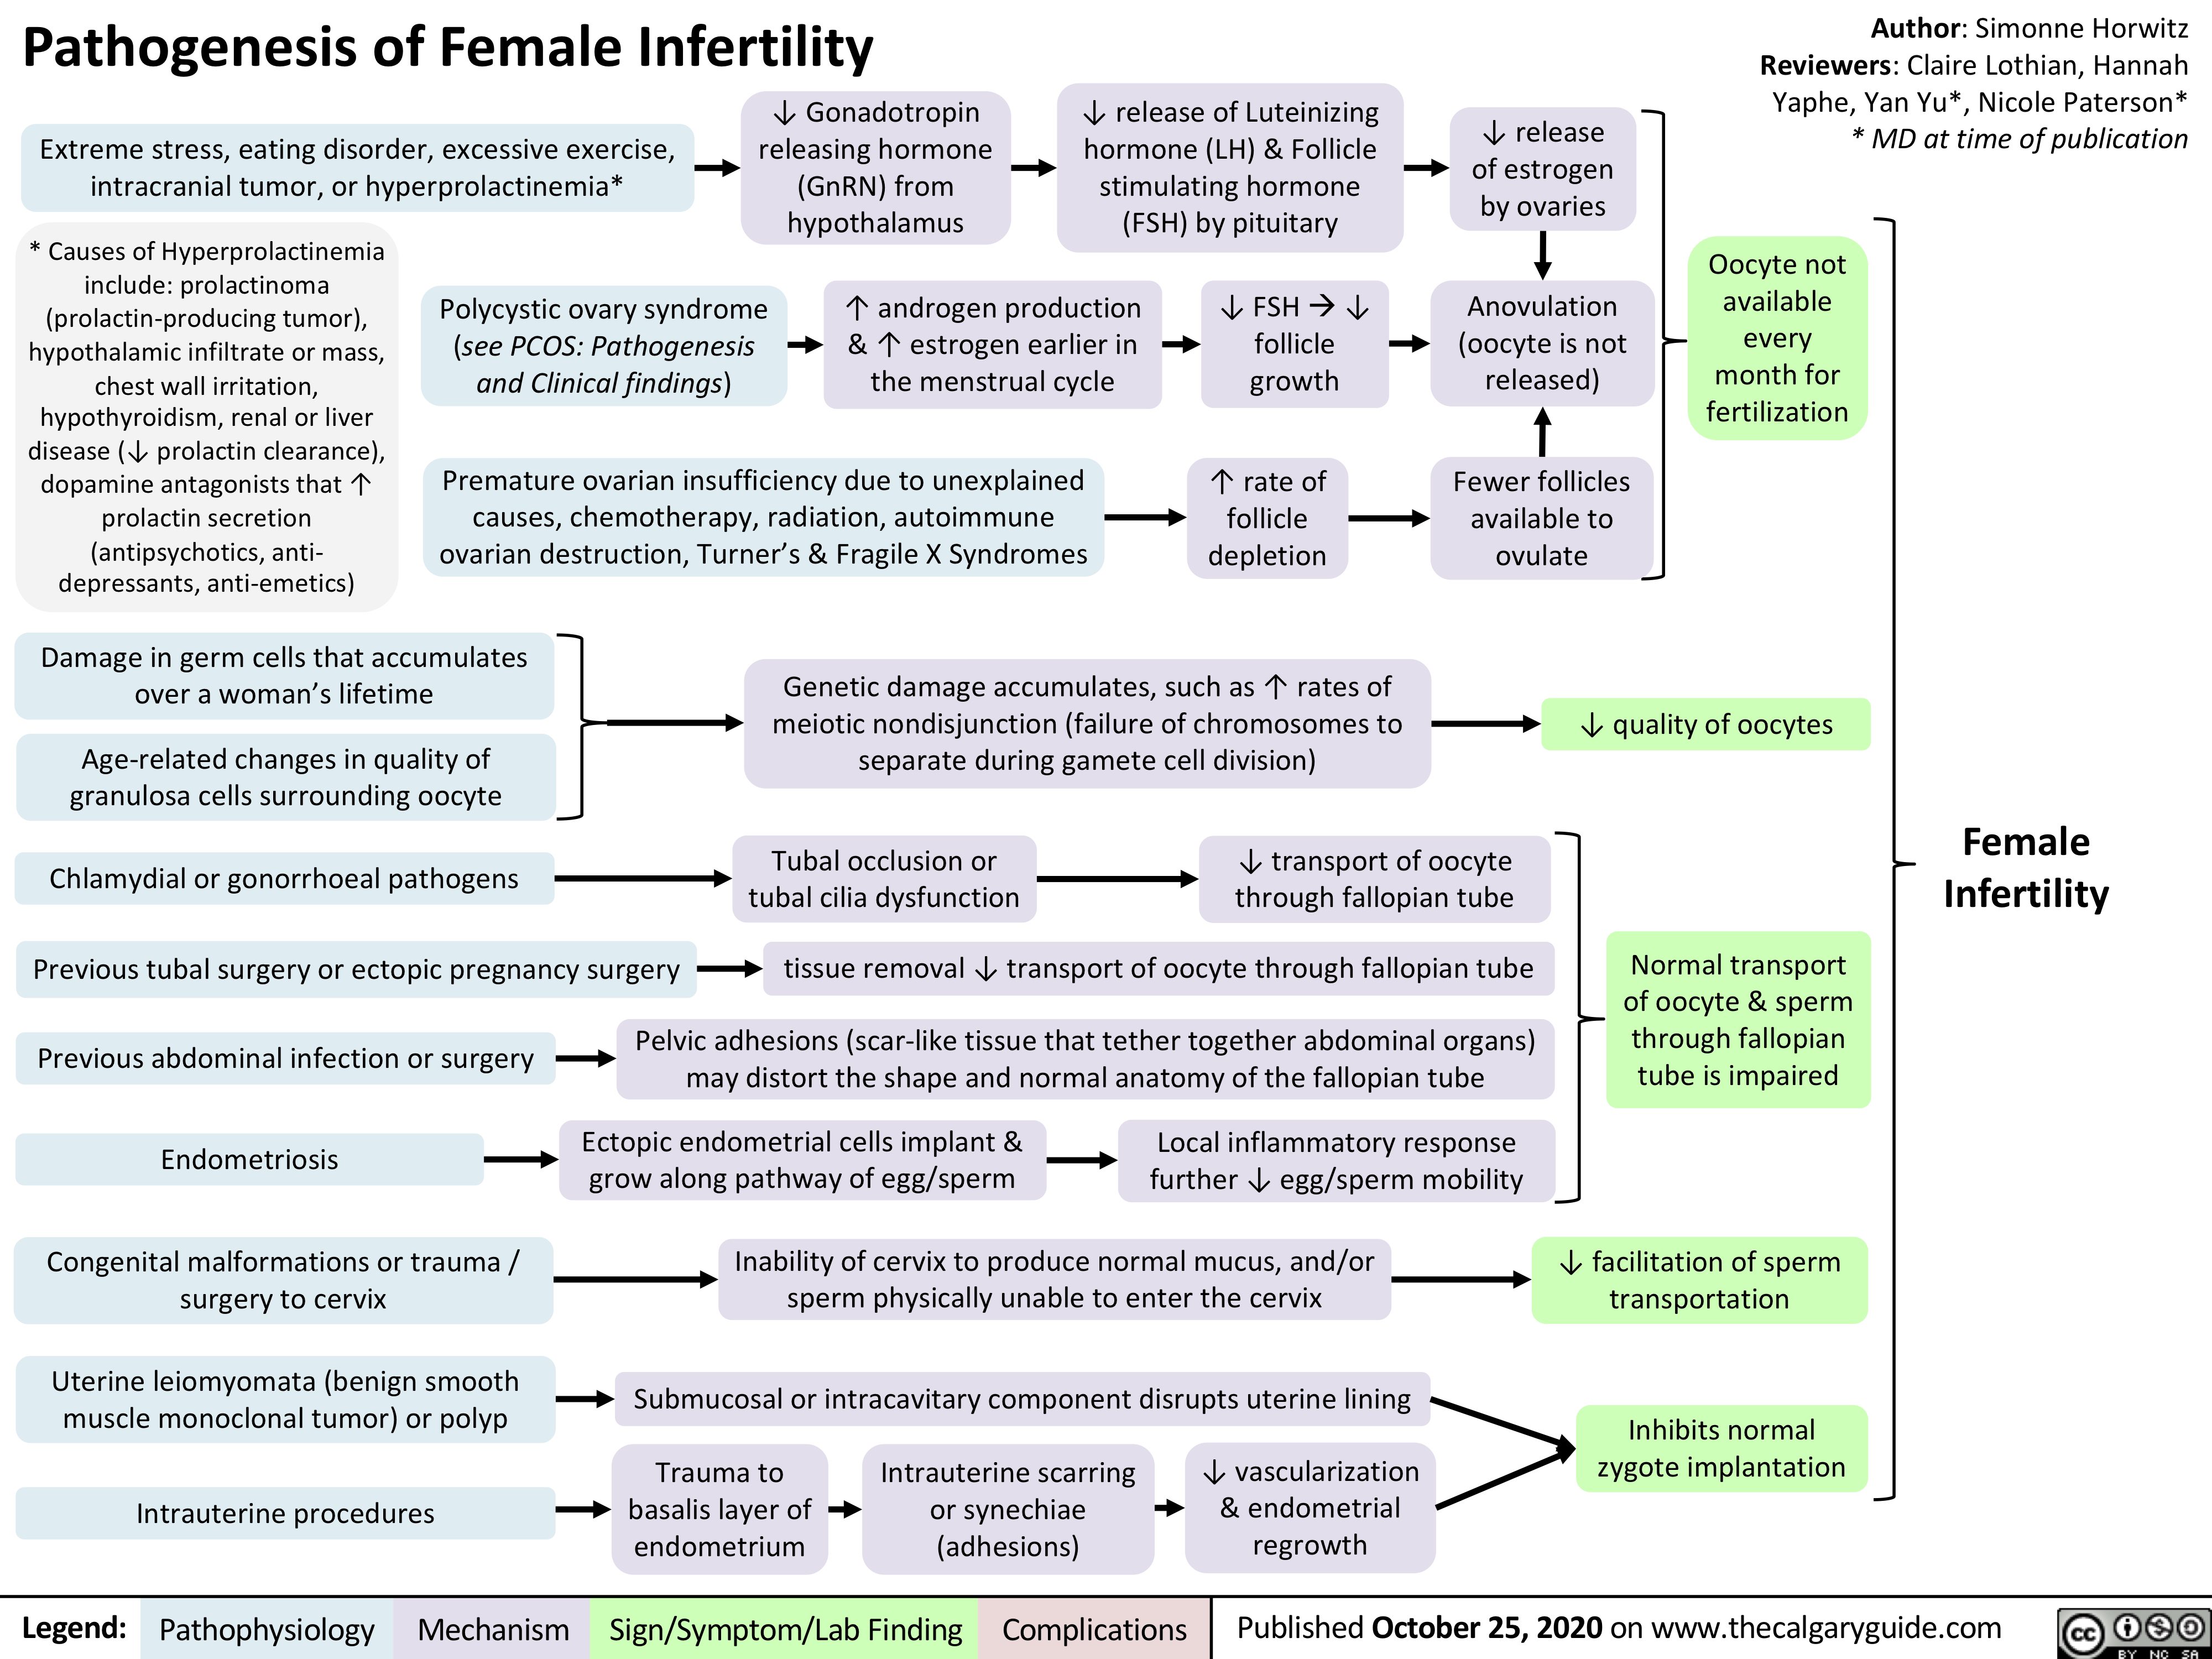 Pathogenesis of Female Infertility
Author: Simonne Horwitz Reviewers: Claire Lothian, Hannah Yaphe, Yan Yu*, Nicole Paterson* * MD at time of publication
     Extreme stress, eating disorder, excessive exercise, intracranial tumor, or hyperprolactinemia*
↓ Gonadotropin releasing hormone (GnRN) from hypothalamus
↓ release of Luteinizing hormone (LH) & Follicle stimulating hormone (FSH) by pituitary
↓ release of estrogen by ovaries
Anovulation (oocyte is not released)
Fewer follicles available to ovulate
      * Causes of Hyperprolactinemia include: prolactinoma (prolactin-producing tumor), hypothalamic infiltrate or mass, chest wall irritation, hypothyroidism, renal or liver disease (↓ prolactin clearance), dopamine antagonists that ↑ prolactin secretion (antipsychotics, anti- depressants, anti-emetics)
Polycystic ovary syndrome (see PCOS: Pathogenesis and Clinical findings)
↑ androgen production & ↑ estrogen earlier in the menstrual cycle
↓ FSHà↓ follicle growth
↑ rate of follicle depletion
Oocyte not available every month for fertilization
            Premature ovarian insufficiency due to unexplained causes, chemotherapy, radiation, autoimmune ovarian destruction, Turner’s & Fragile X Syndromes
    Damage in germ cells that accumulates over a woman’s lifetime
Age-related changes in quality of granulosa cells surrounding oocyte
Genetic damage accumulates, such as ↑ rates of meiotic nondisjunction (failure of chromosomes to separate during gamete cell division)
Tubal occlusion or ↓ transport of oocyte tubal cilia dysfunction through fallopian tube
↓ quality of oocytes
Normal transport of oocyte & sperm through fallopian tube is impaired
↓ facilitation of sperm transportation
Inhibits normal zygote implantation
        Chlamydial or gonorrhoeal pathogens
Previous tubal surgery or ectopic pregnancy surgery       tissue removal ↓ transport of oocyte through fallopian tube
Female Infertility
     Previous abdominal infection or surgery Endometriosis
Congenital malformations or trauma / surgery to cervix
Uterine leiomyomata (benign smooth muscle monoclonal tumor) or polyp
Intrauterine procedures
Pelvic adhesions (scar-like tissue that tether together abdominal organs) may distort the shape and normal anatomy of the fallopian tube
Ectopic endometrial cells implant & Local inflammatory response grow along pathway of egg/sperm further ↓ egg/sperm mobility
Inability of cervix to produce normal mucus, and/or sperm physically unable to enter the cervix
Submucosal or intracavitary component disrupts uterine lining
                    Trauma to basalis layer of endometrium
Intrauterine scarring or synechiae (adhesions)
↓ vascularization & endometrial regrowth
     Legend:
 Pathophysiology
 Mechanism
Sign/Symptom/Lab Finding
  Complications
Published October 25, 2020 on www.thecalgaryguide.com
   